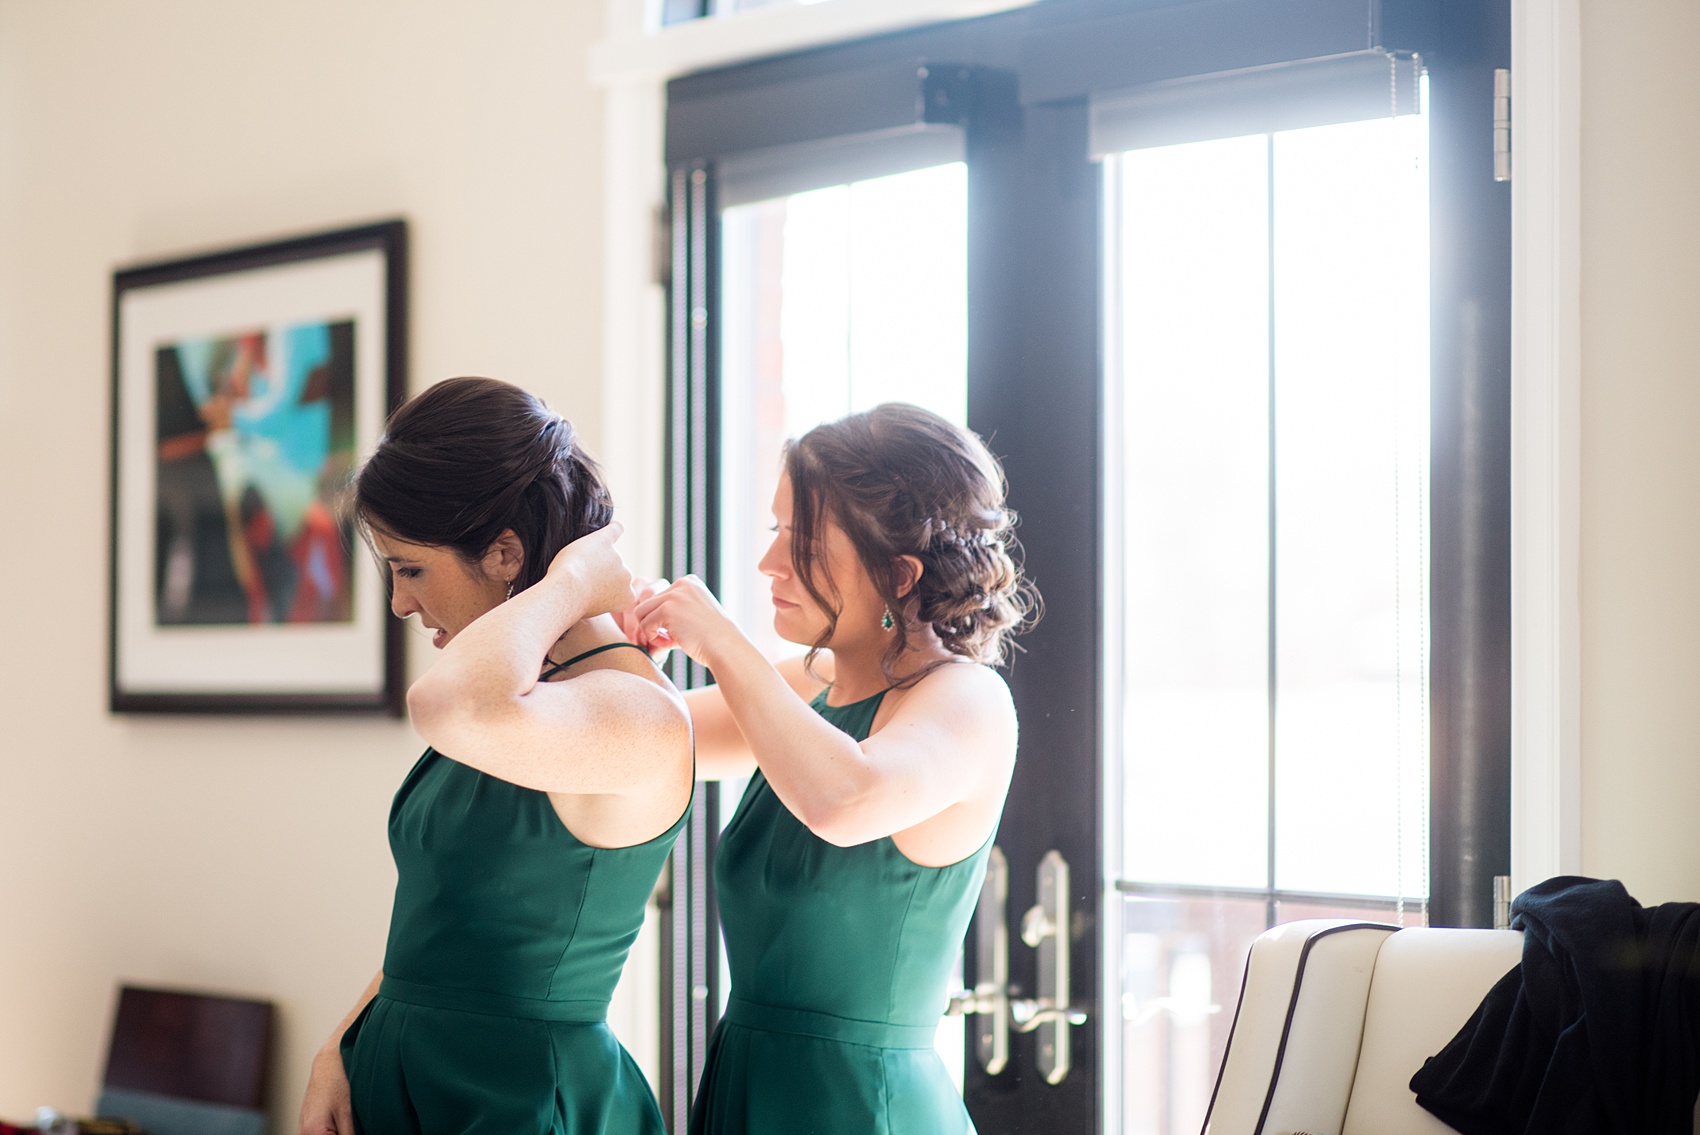 Saratoga Springs destination wedding photos by Mikkel Paige Photography. The bridal party got ready at the Pavilion Grand hotel and wore dark green gowns for the April spring wedding. #SaratogaSpringsNY #SaratogaSprings #mikkelpaige #NYwedding #destinationwedding 